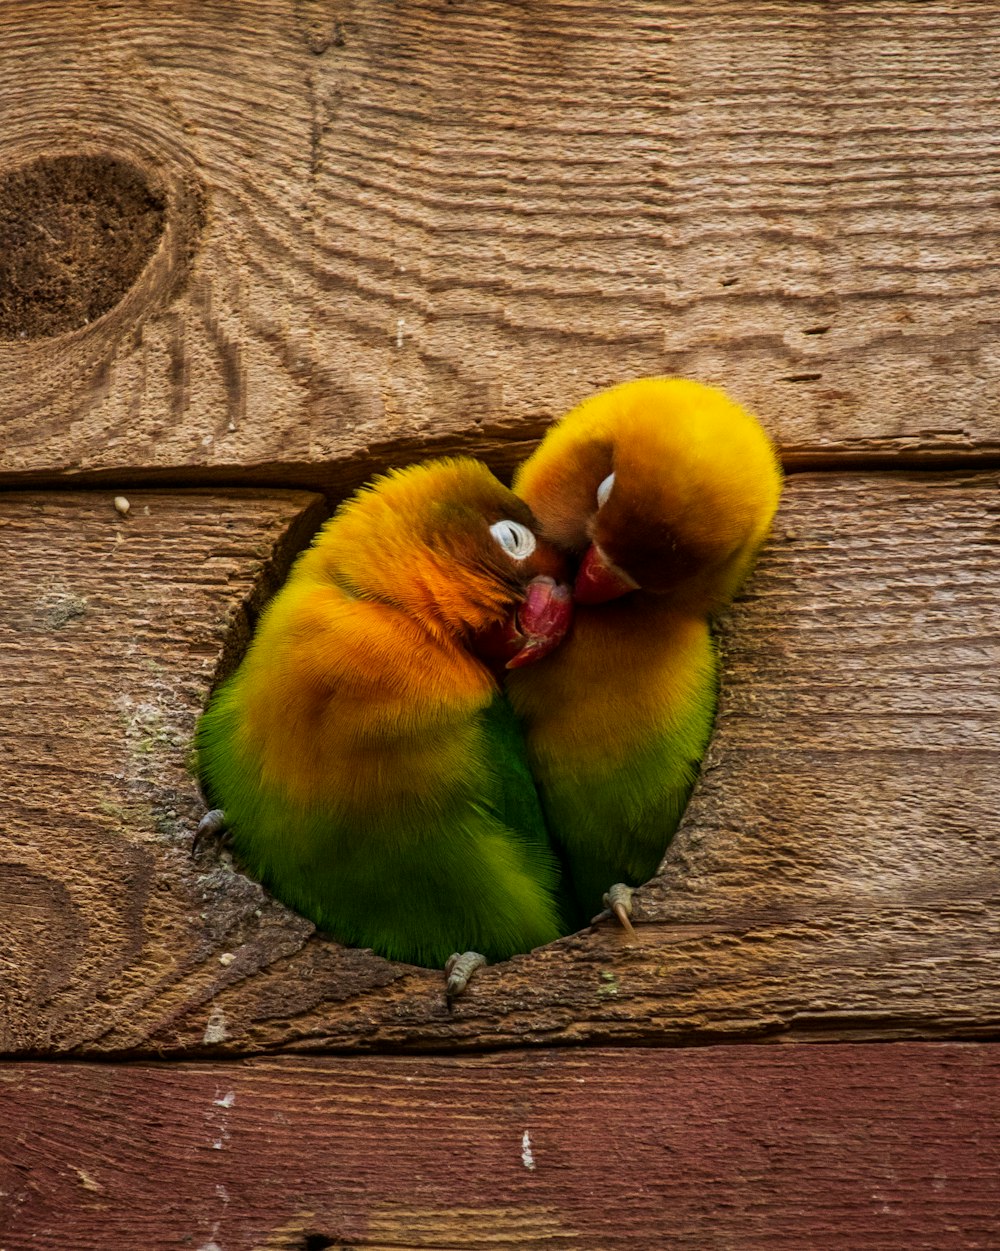 yellow green and red bird on brown wooden surface